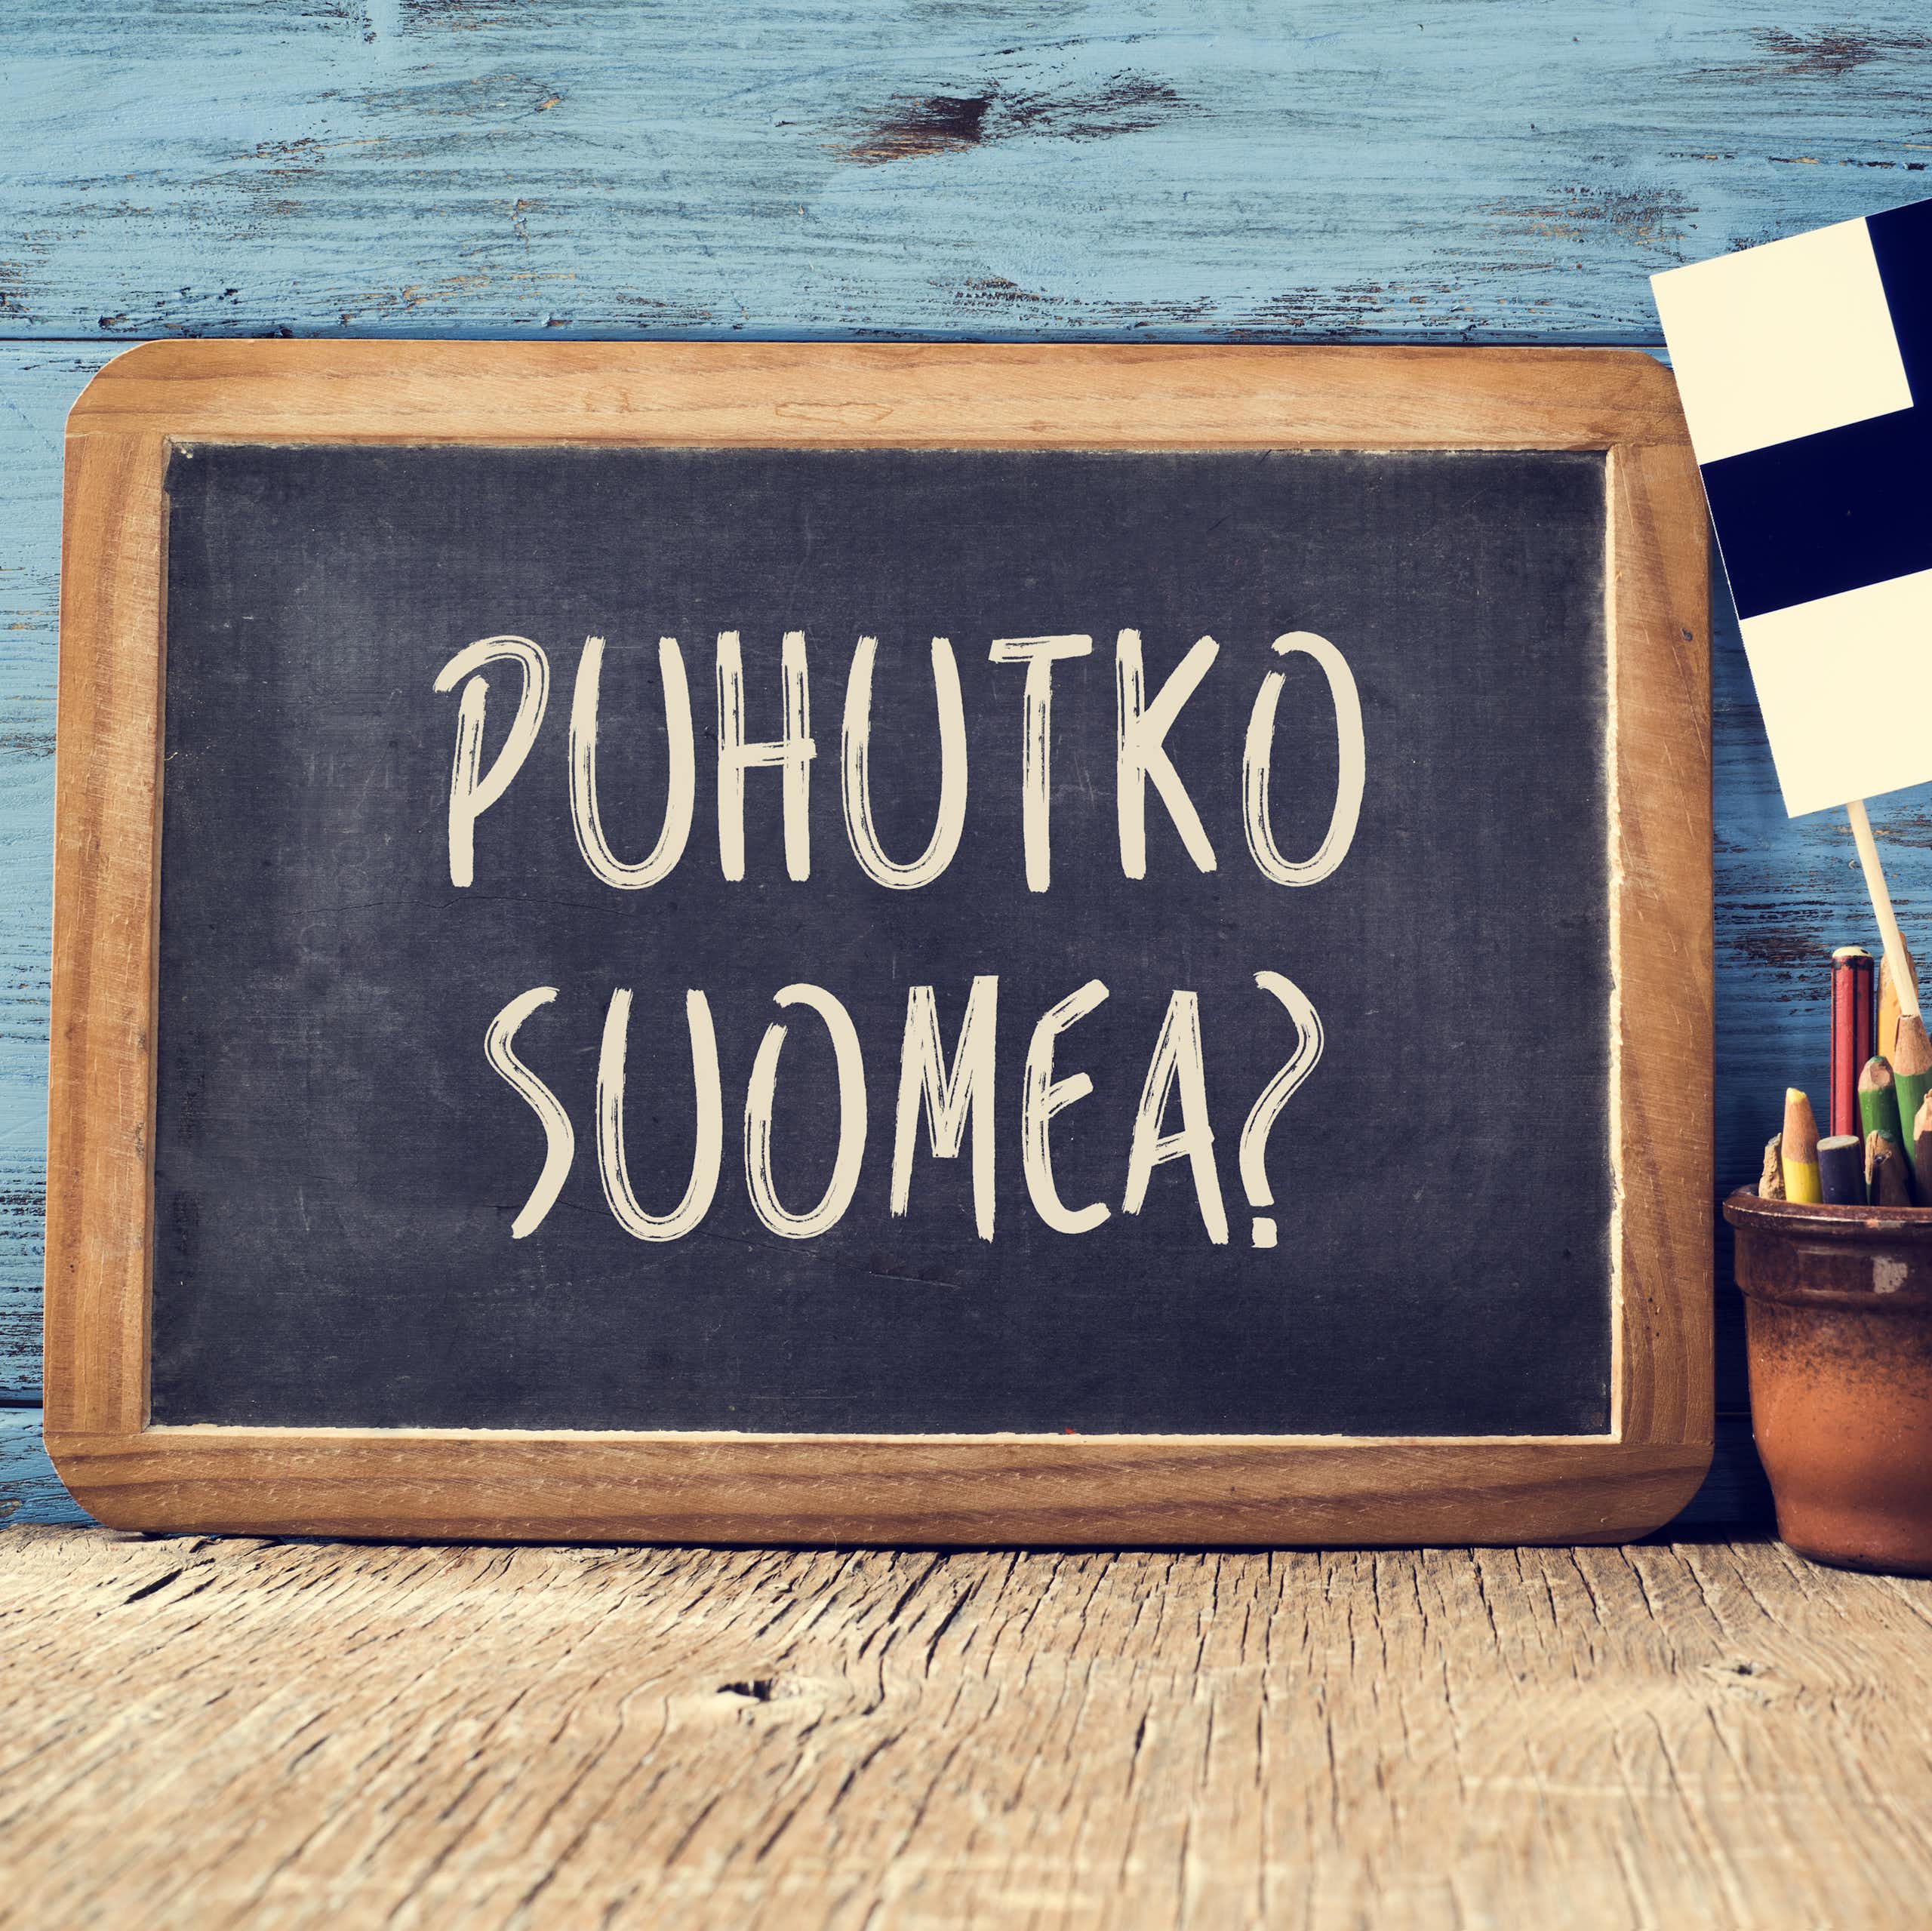 Why we can read Finnish without understanding it – a look at ‘transparent’ languages